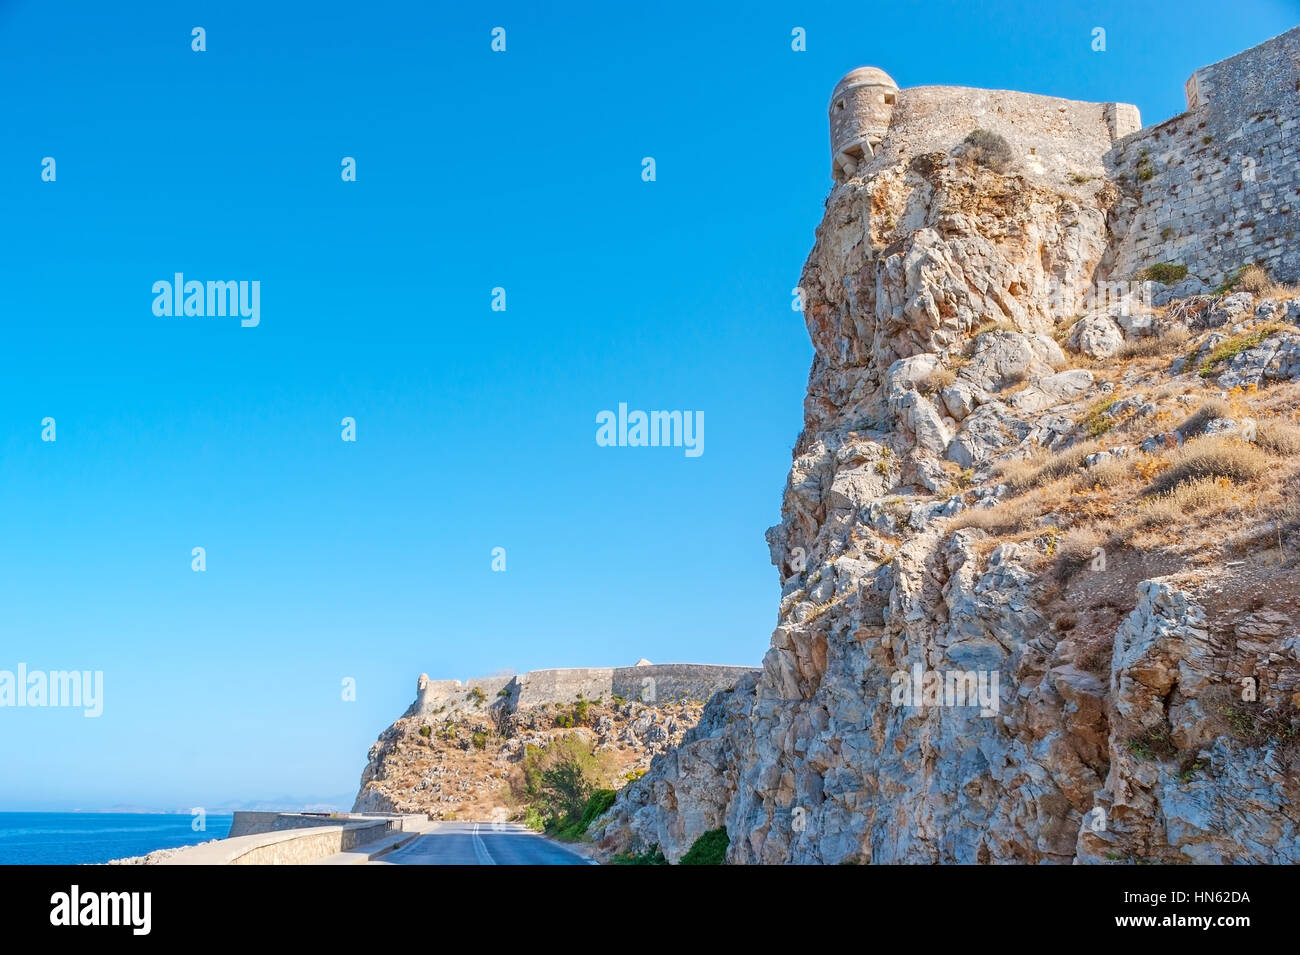 The view on rocky slopes with Venenian citadel on the top, Rethymno, Greece Stock Photo